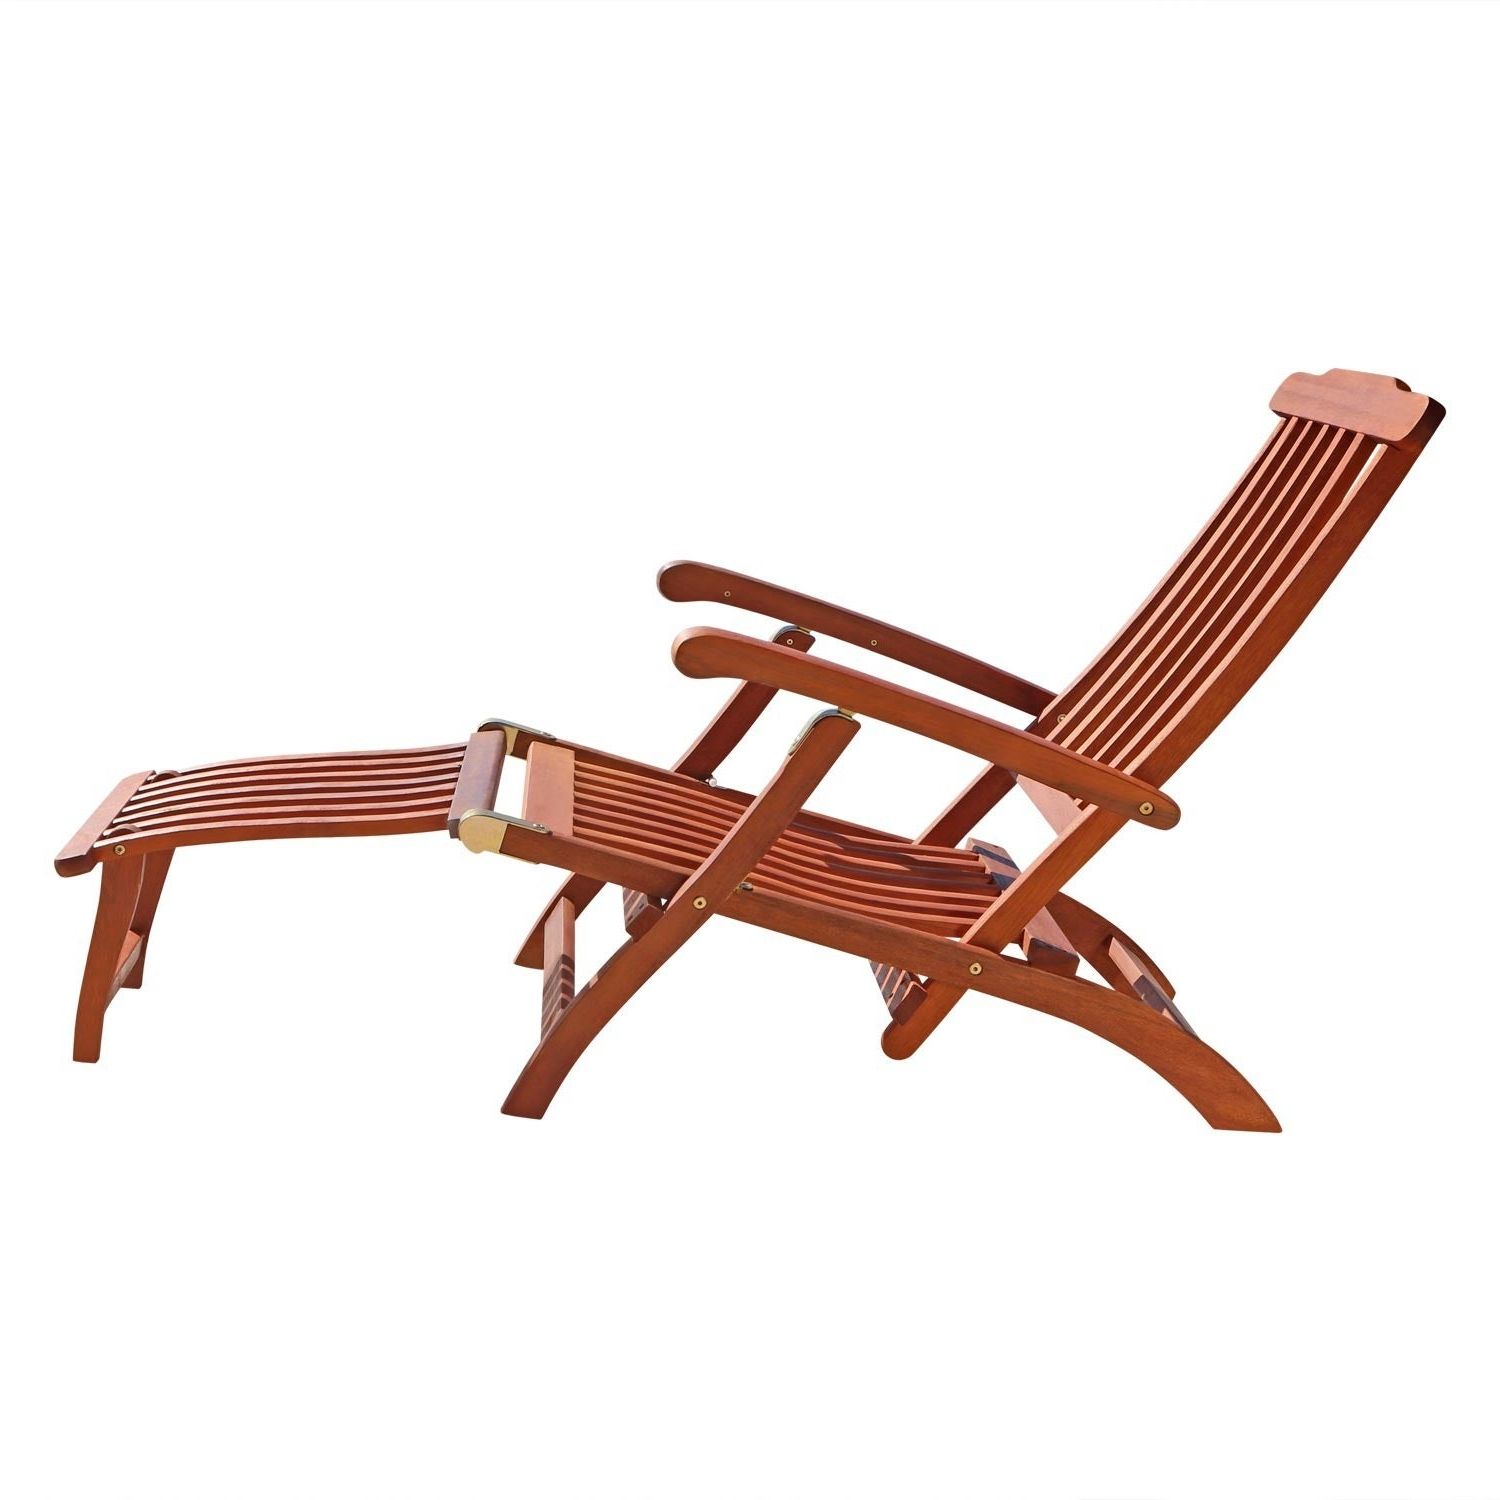 Current Havenside Home Surfside Relaxer Chaise Lounges Inside Havenside Home Surfside Outdoor Lounge Chair (View 11 of 25)